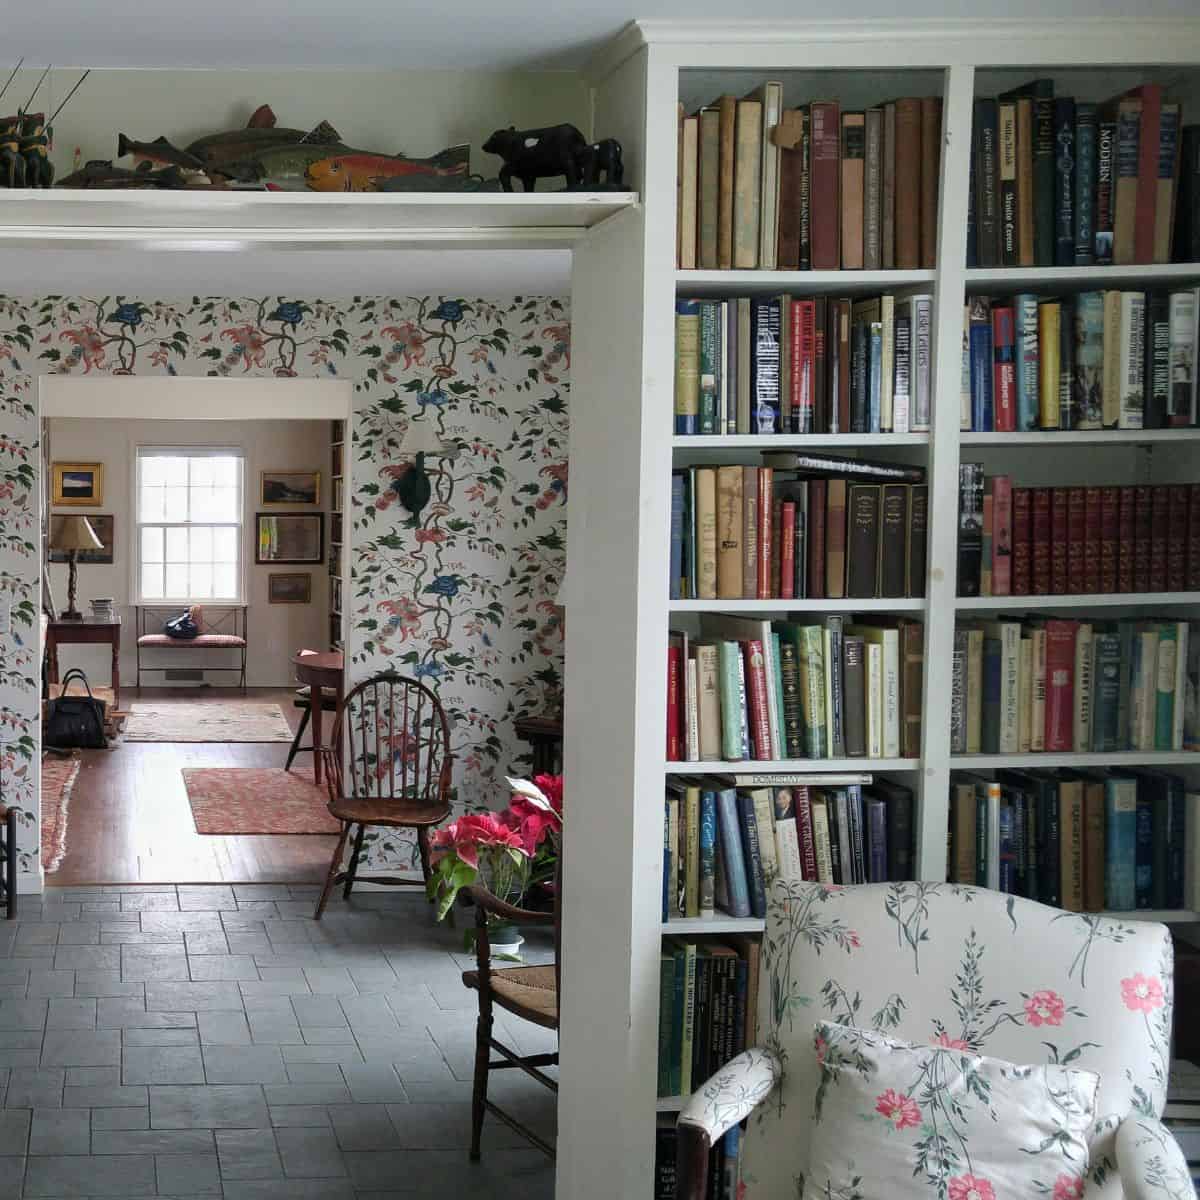 bookshelves and chair in front of a foyer.